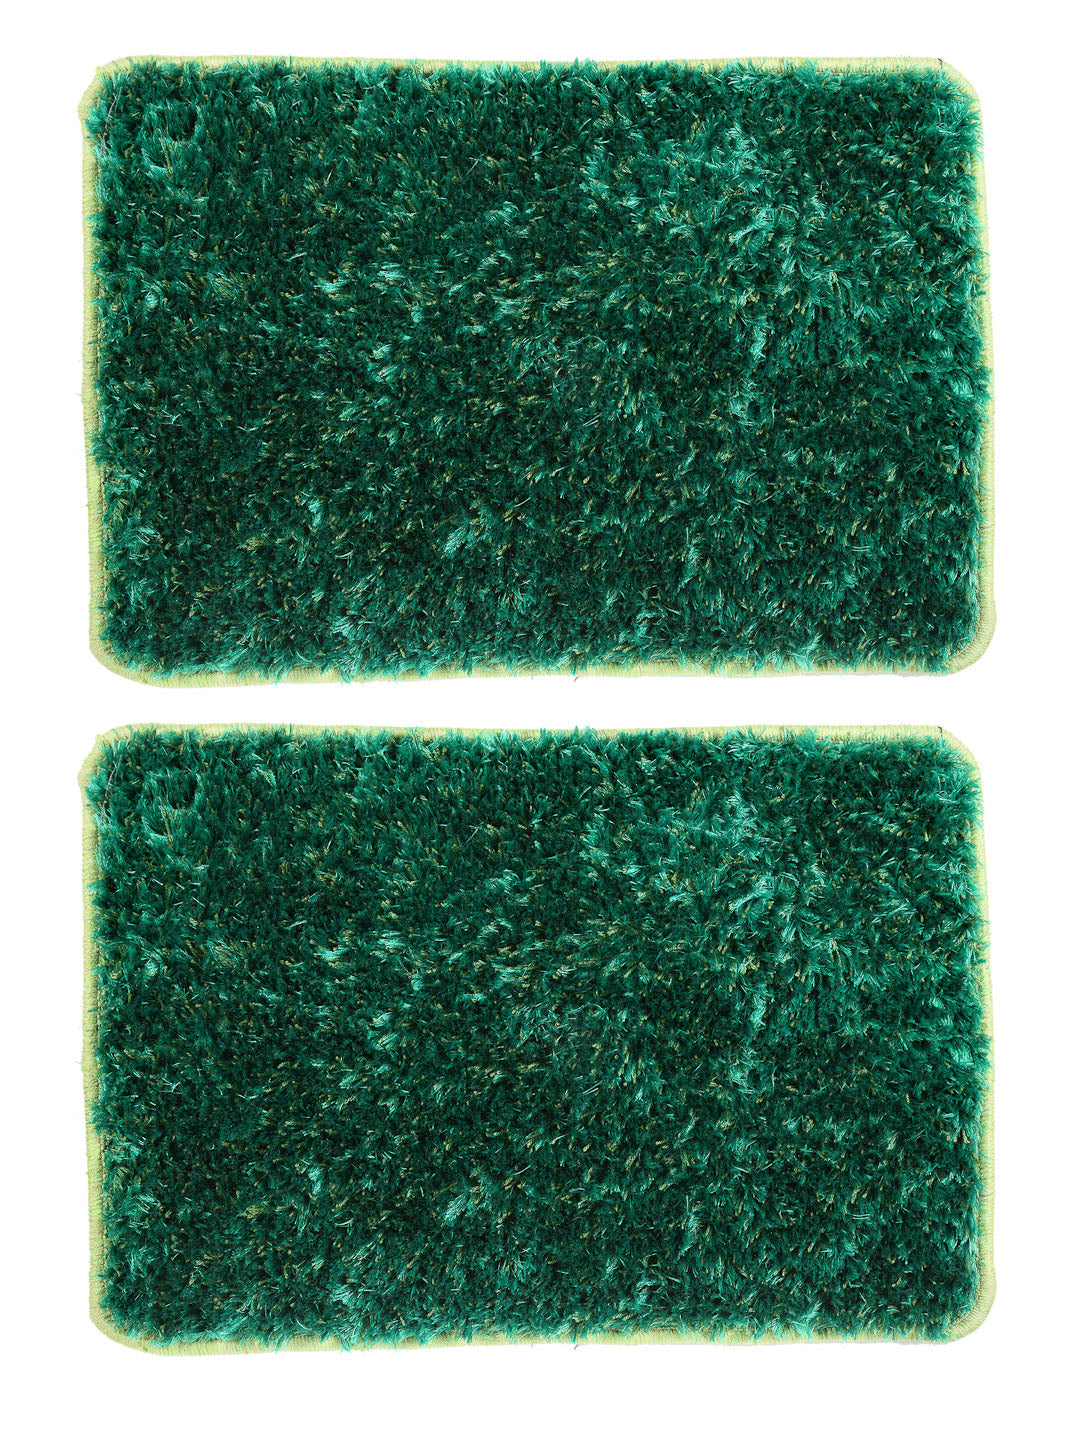 Arrabi Green Solid Synthetic Full Size Floor Mat (60 X 40 cm) (Pack of 2)